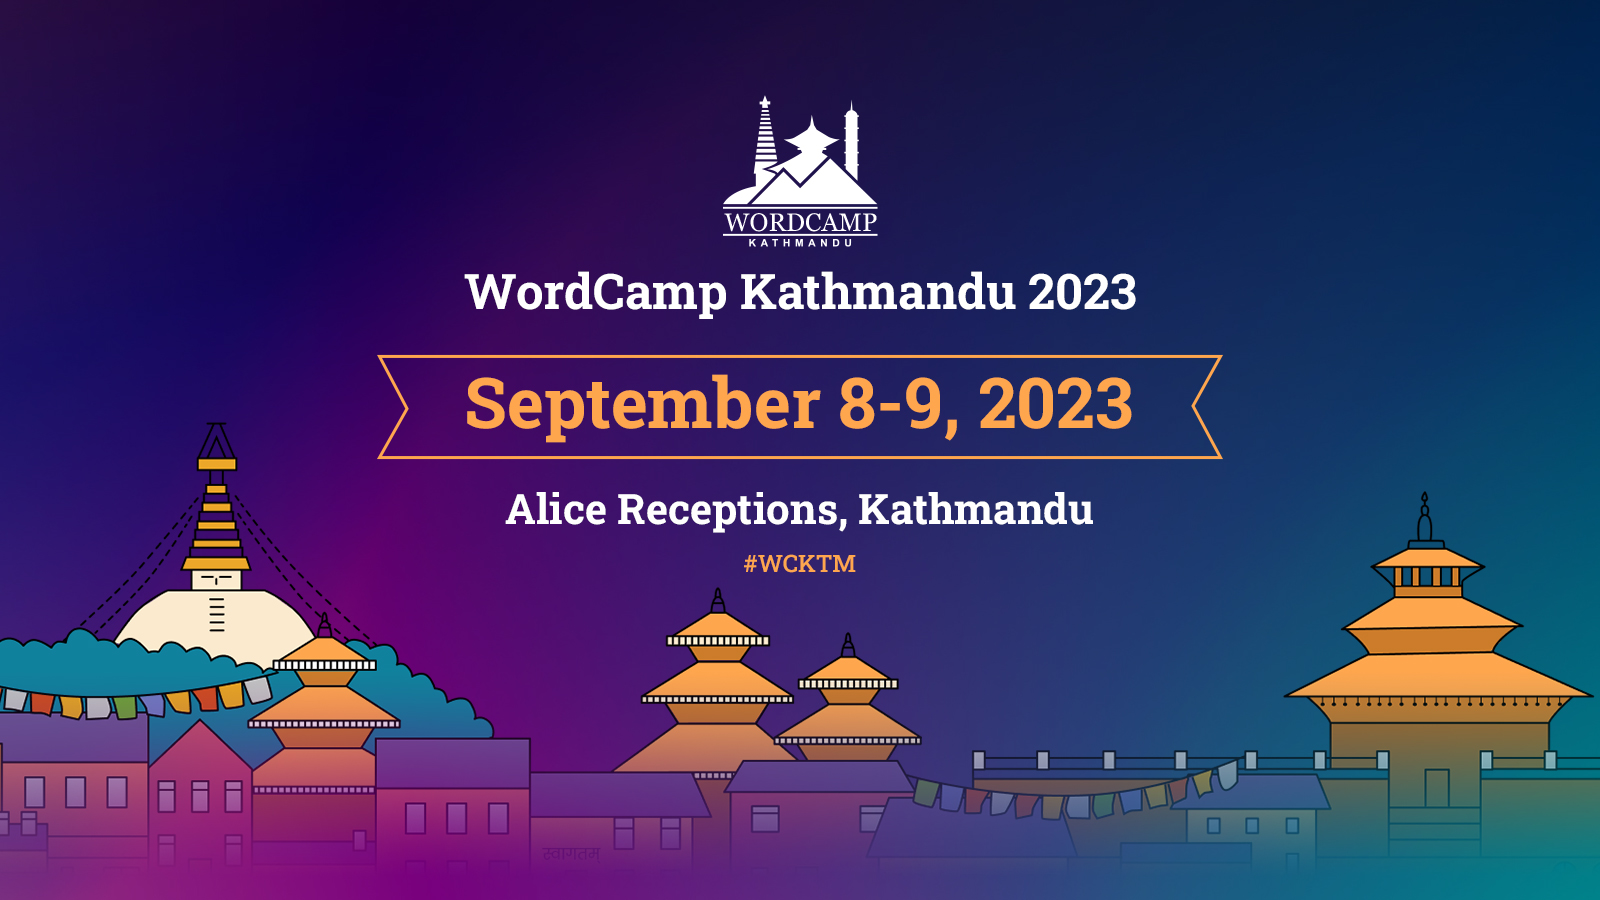 WordCamp Kathmandu aims to bring together WordPress enthusiasts and users